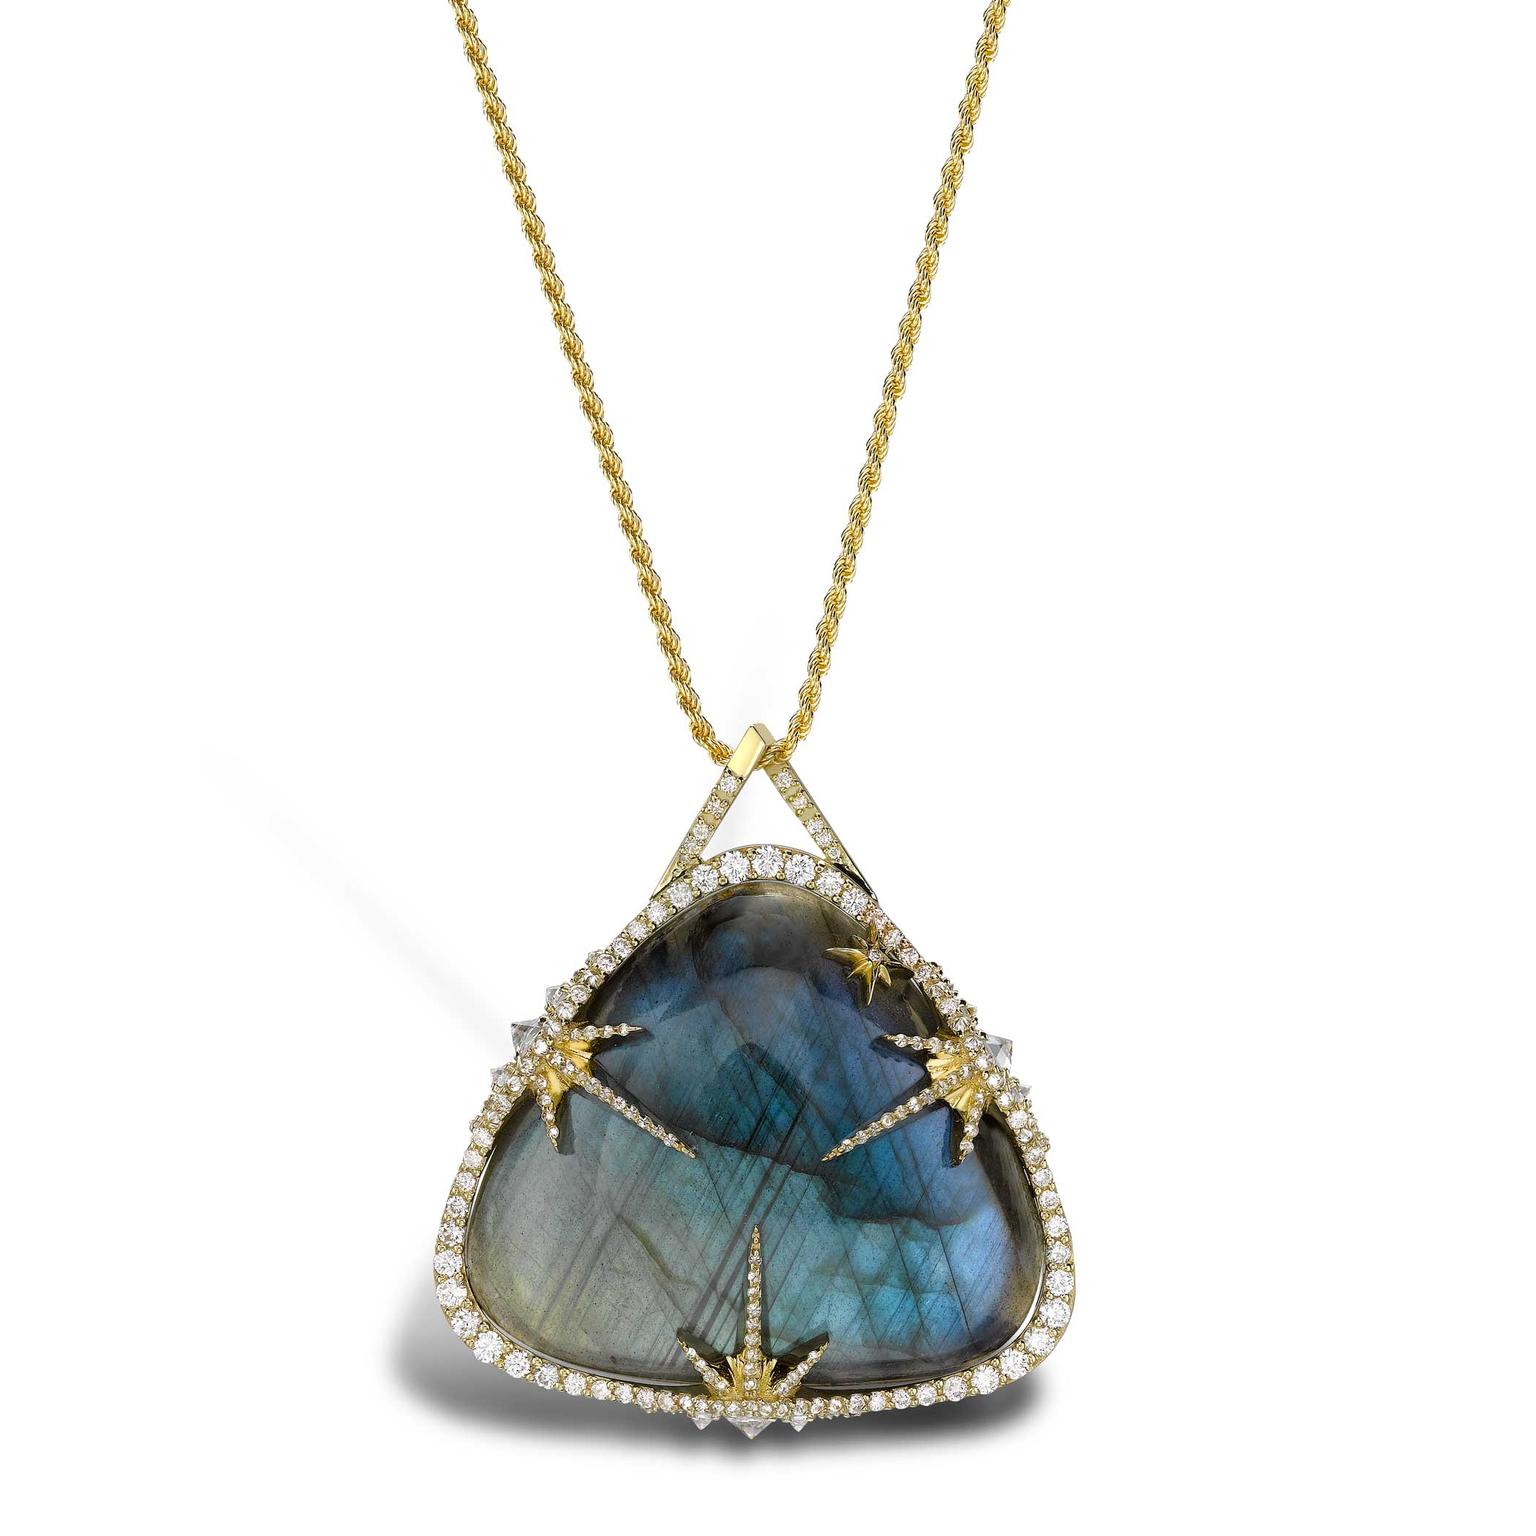 Venyx Theiya Obscura pendant in yellow gold with diamonds and labradorite